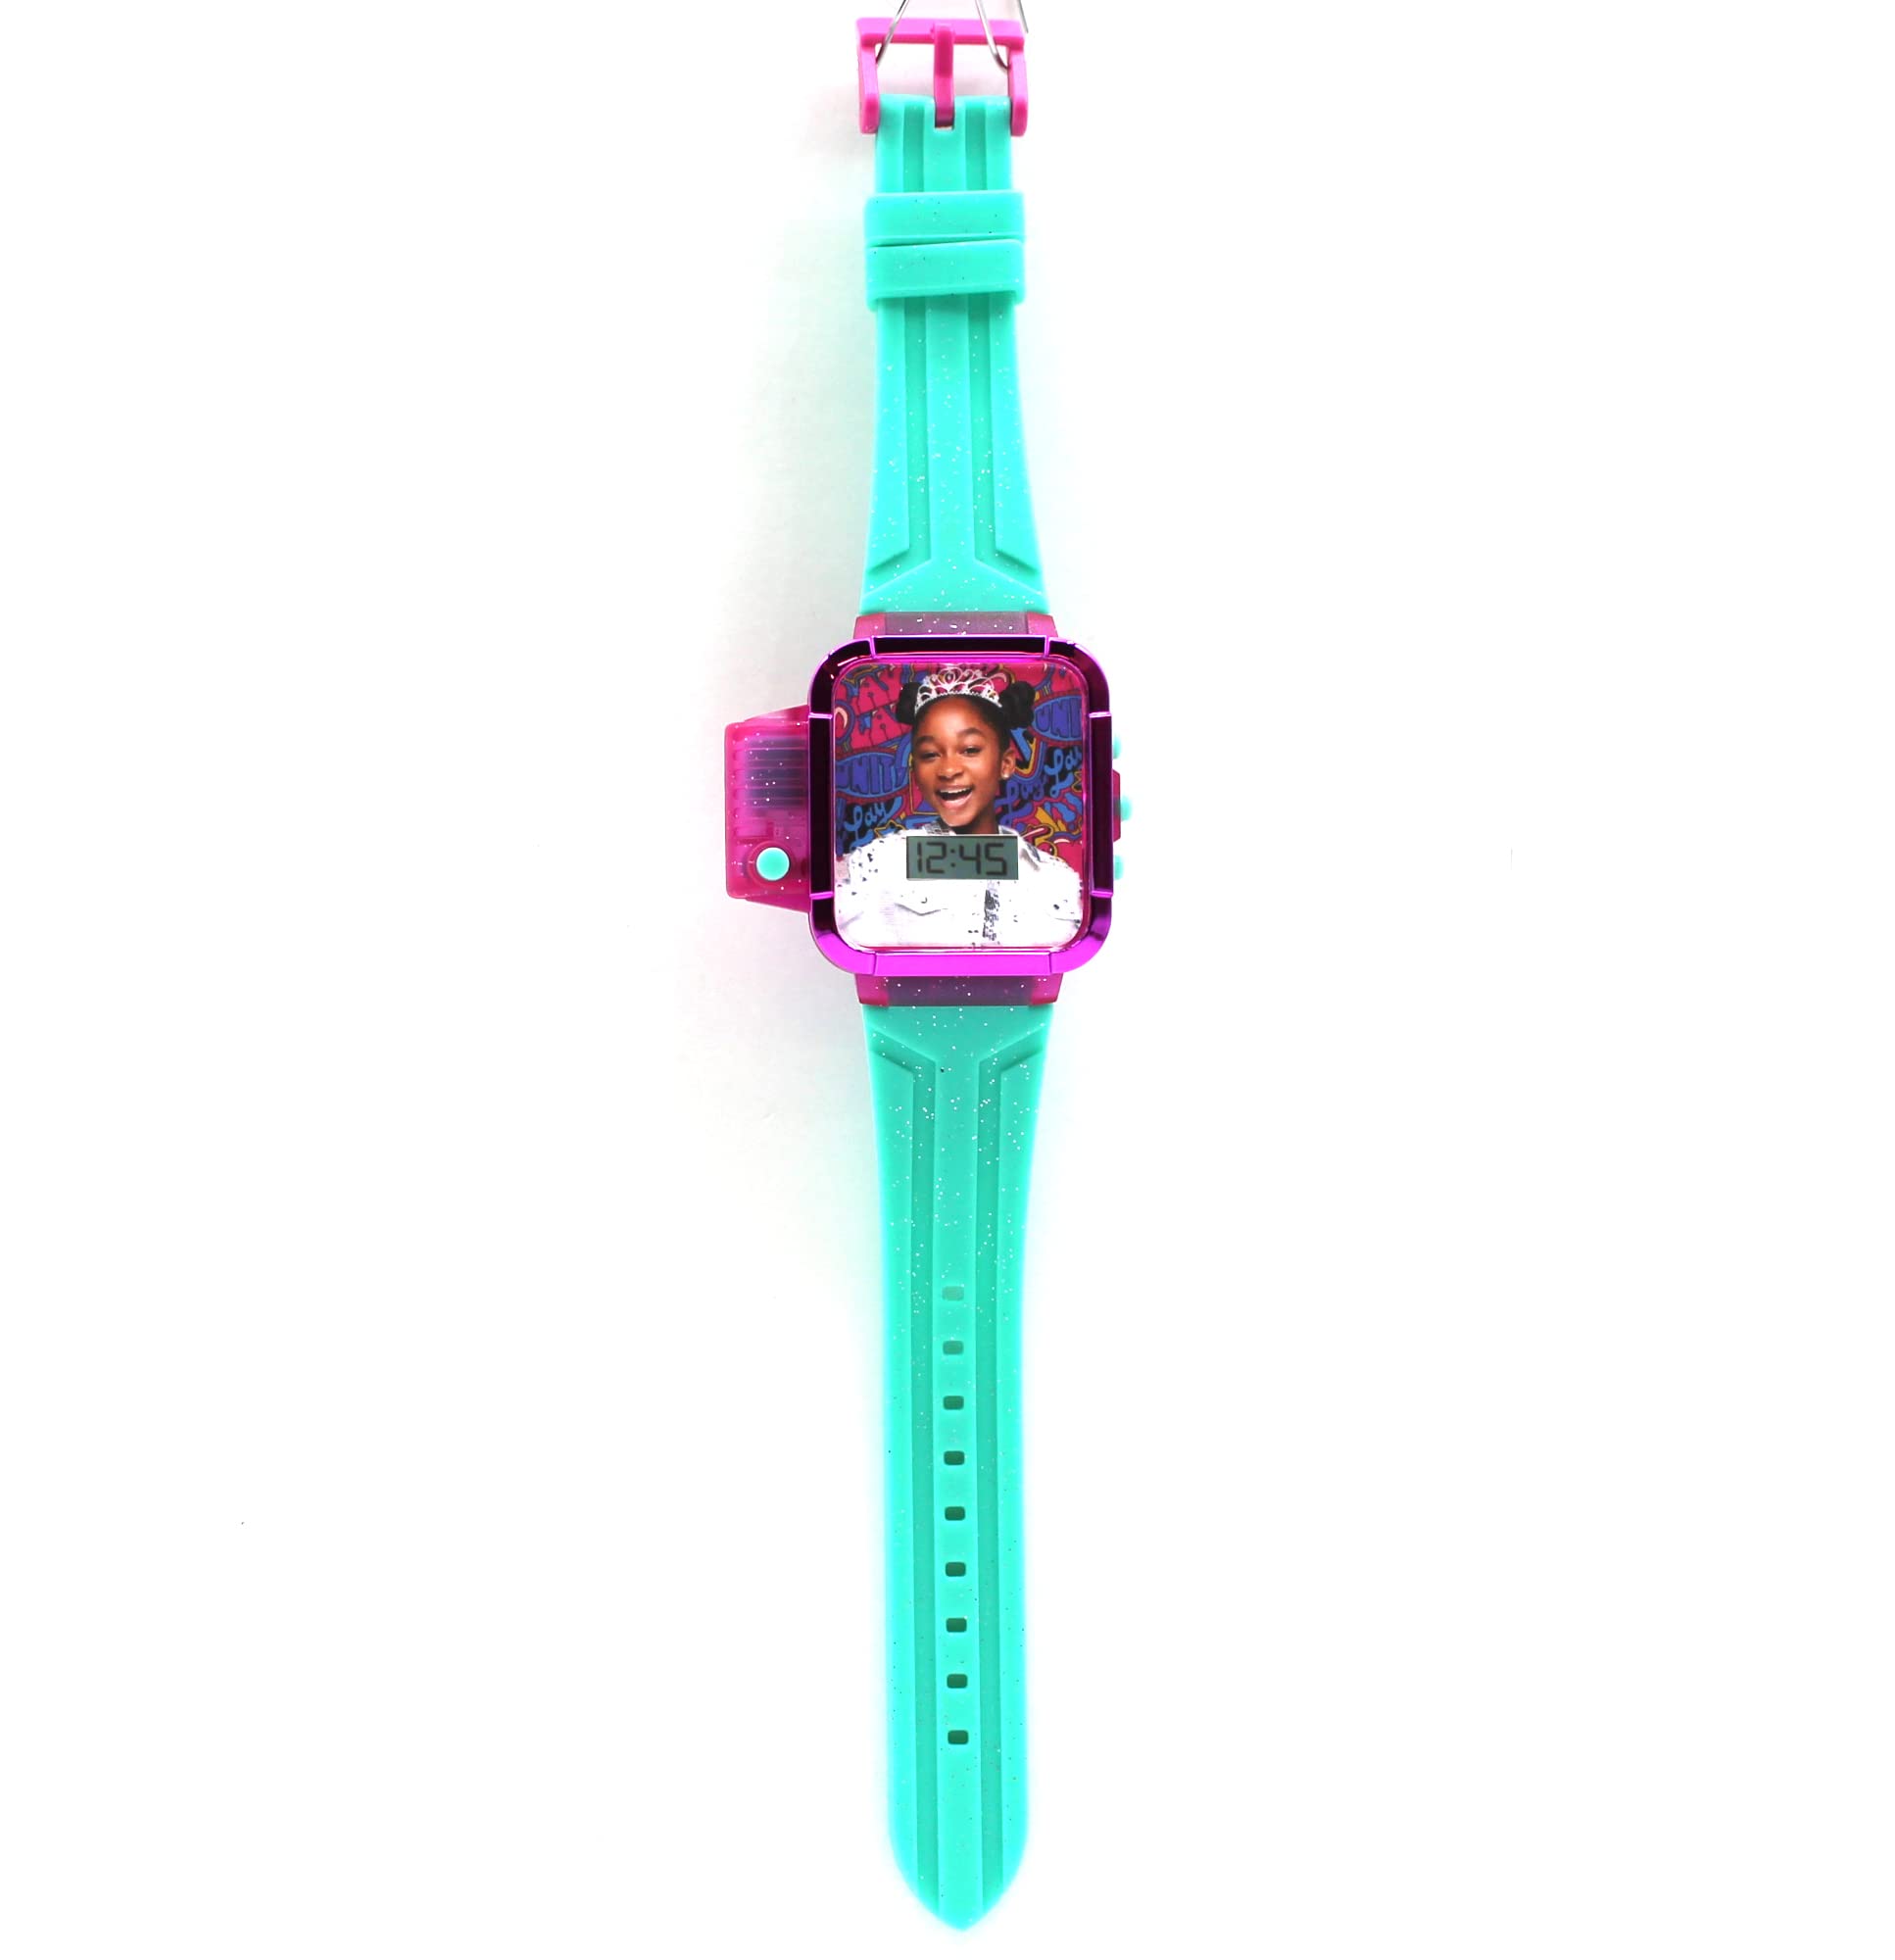 Accutime Kids Nickelodeon That Girl Lay Lay Hot Pink Digital LCD Quartz Wrist Watch with Flashlight, Turquoise Green Strap for Girls, Boys, Kids (Model: LAY4030AZ)